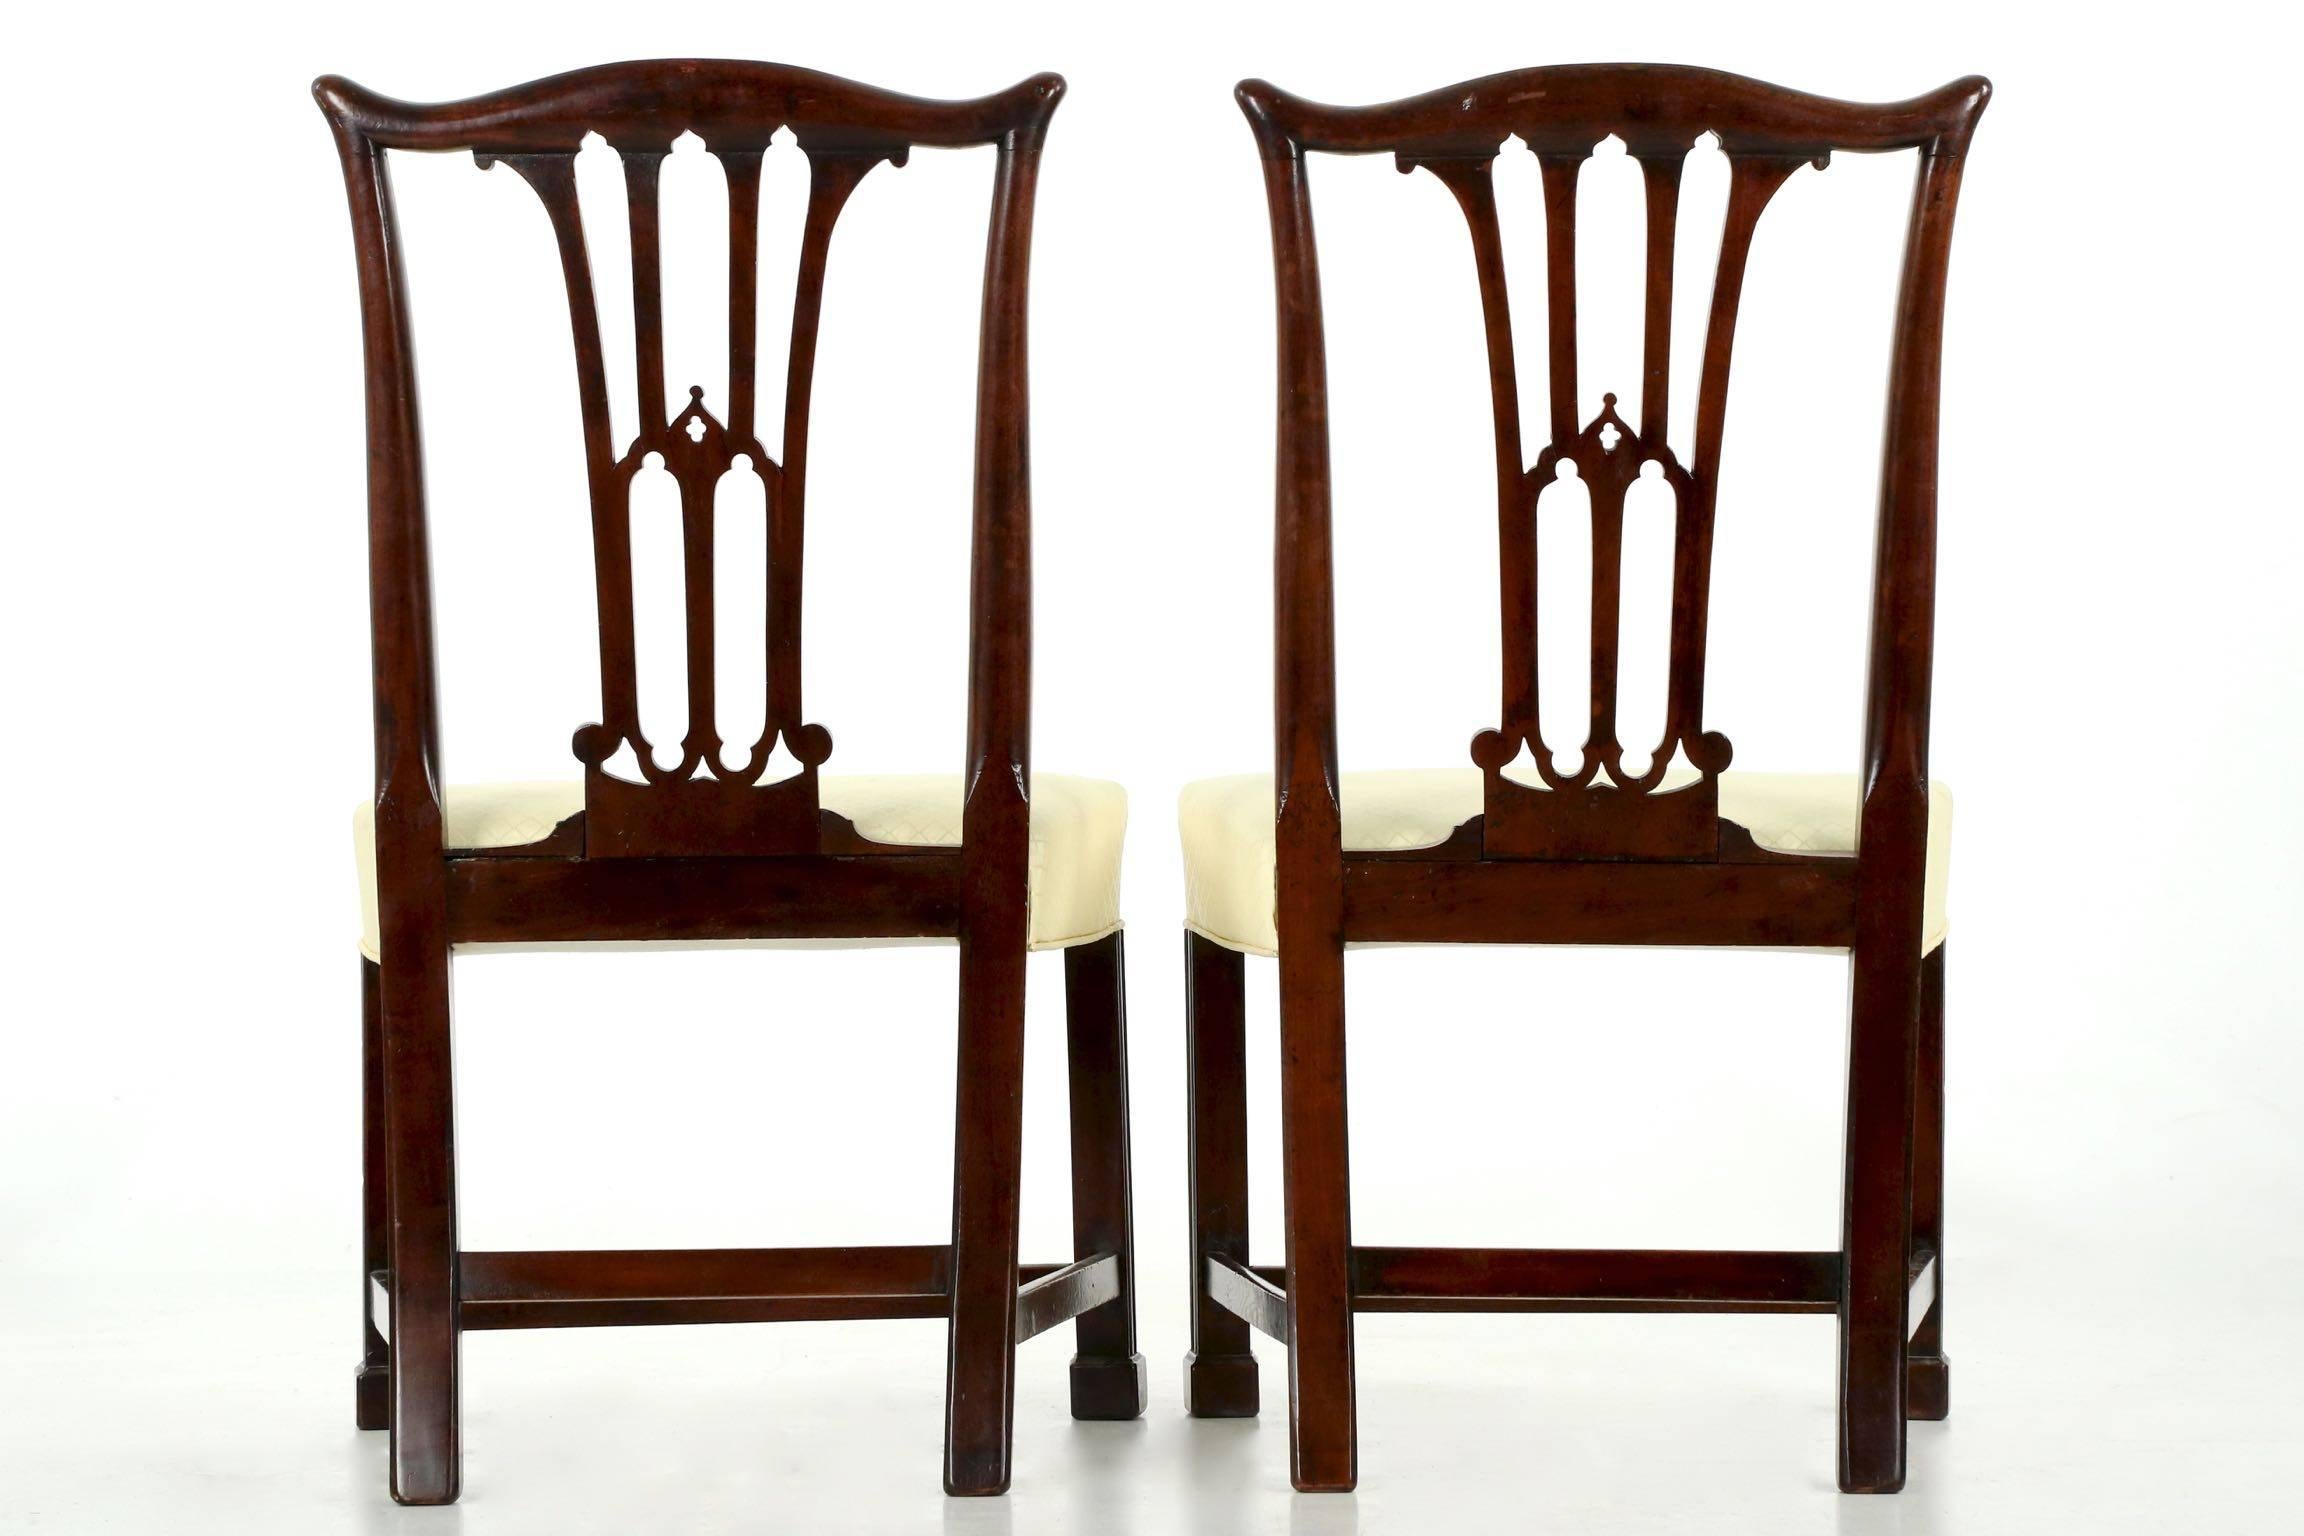 Hand-Crafted Pair of English Chippendale Mahogany Side Chairs in Gothic Taste, circa 1780